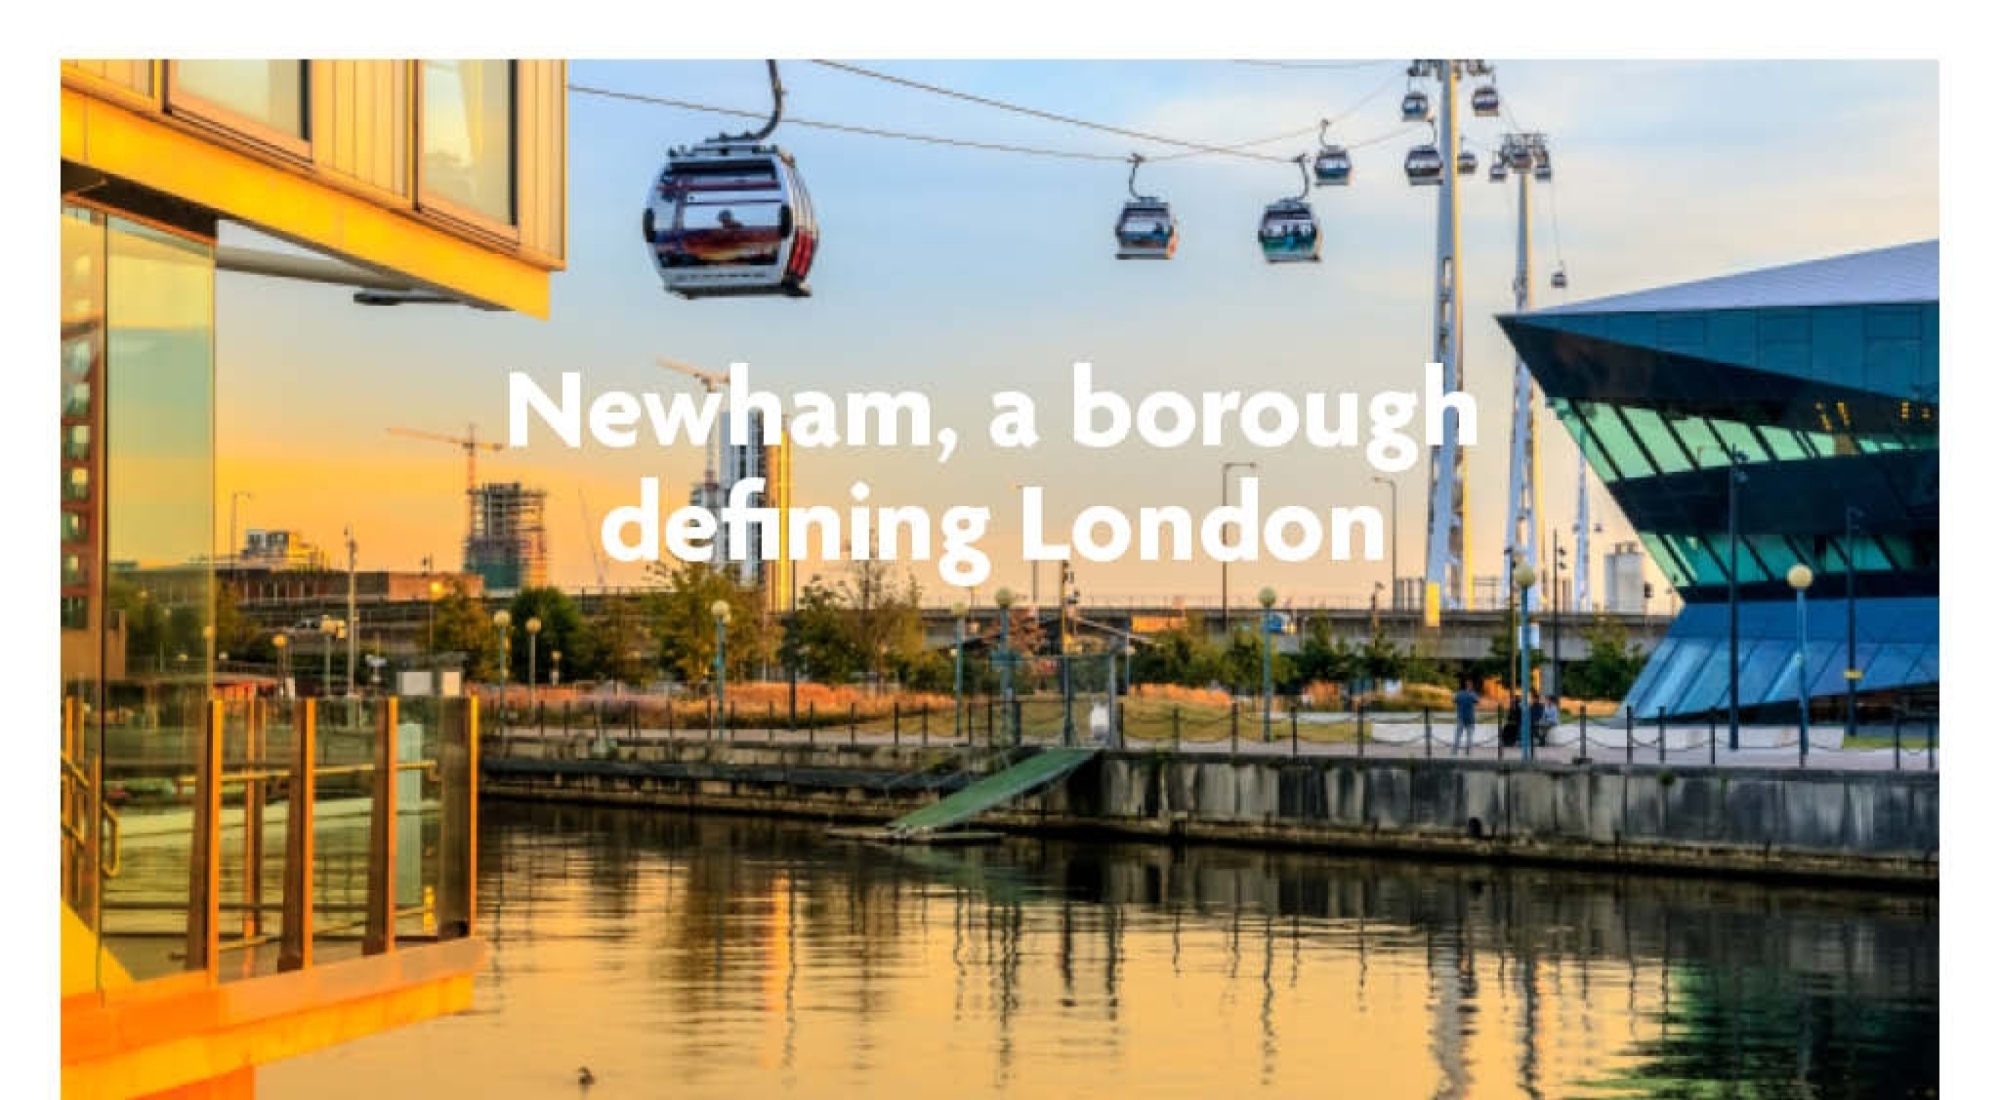 Lead a borough redeifning newham